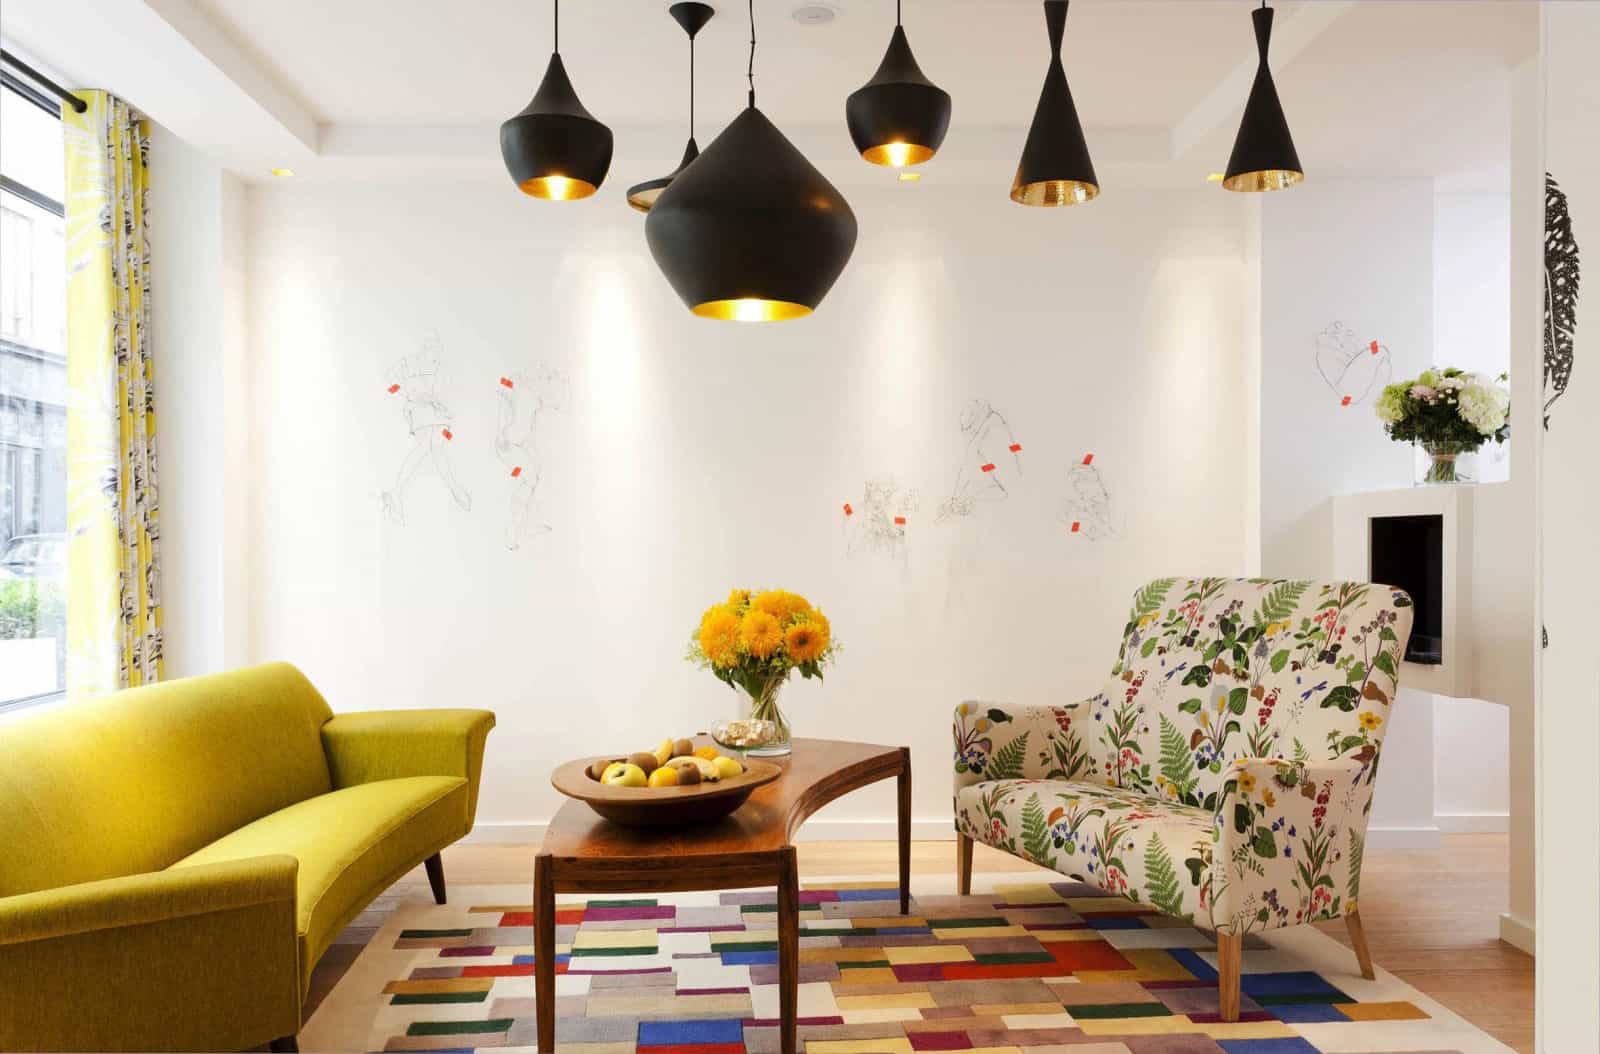 Eclectic and Colorful Design with Retro Accents